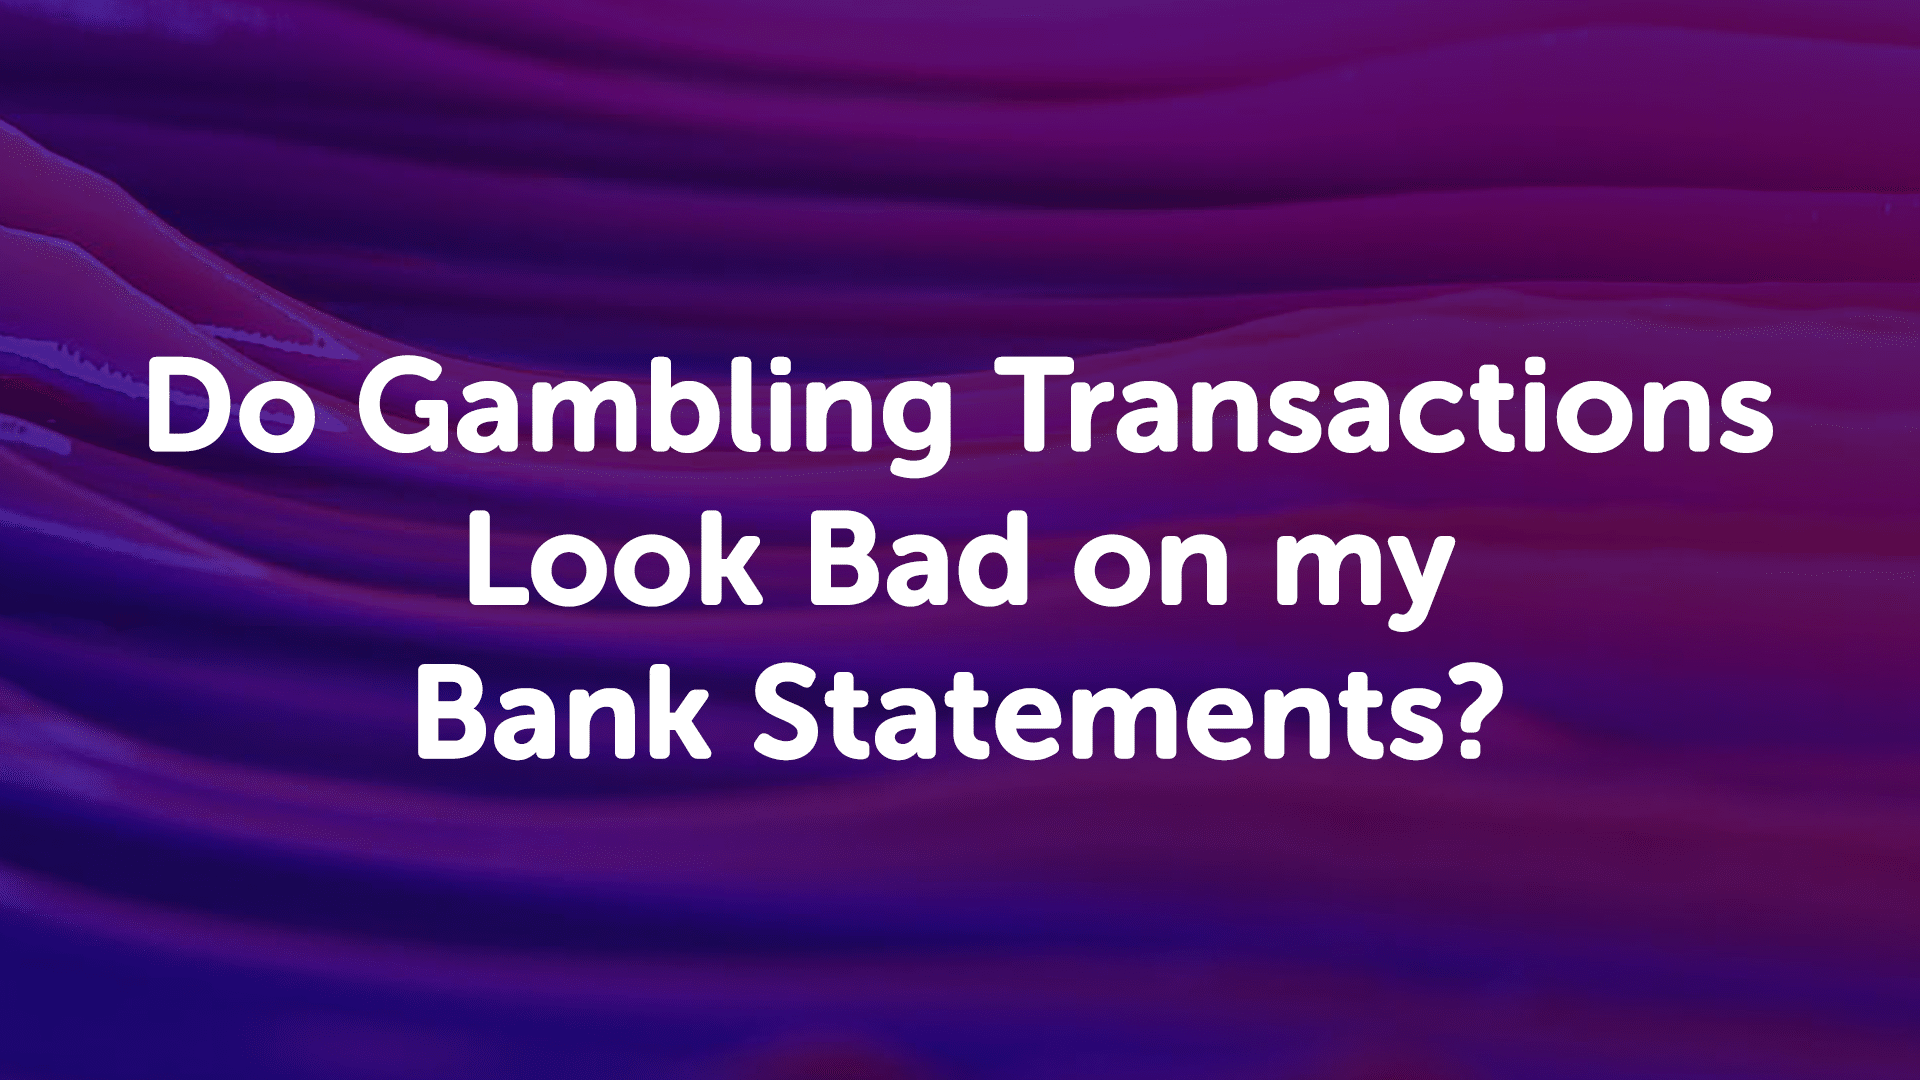 Do gambling transactions look bad on my bank statements? | Leicestermoneyman